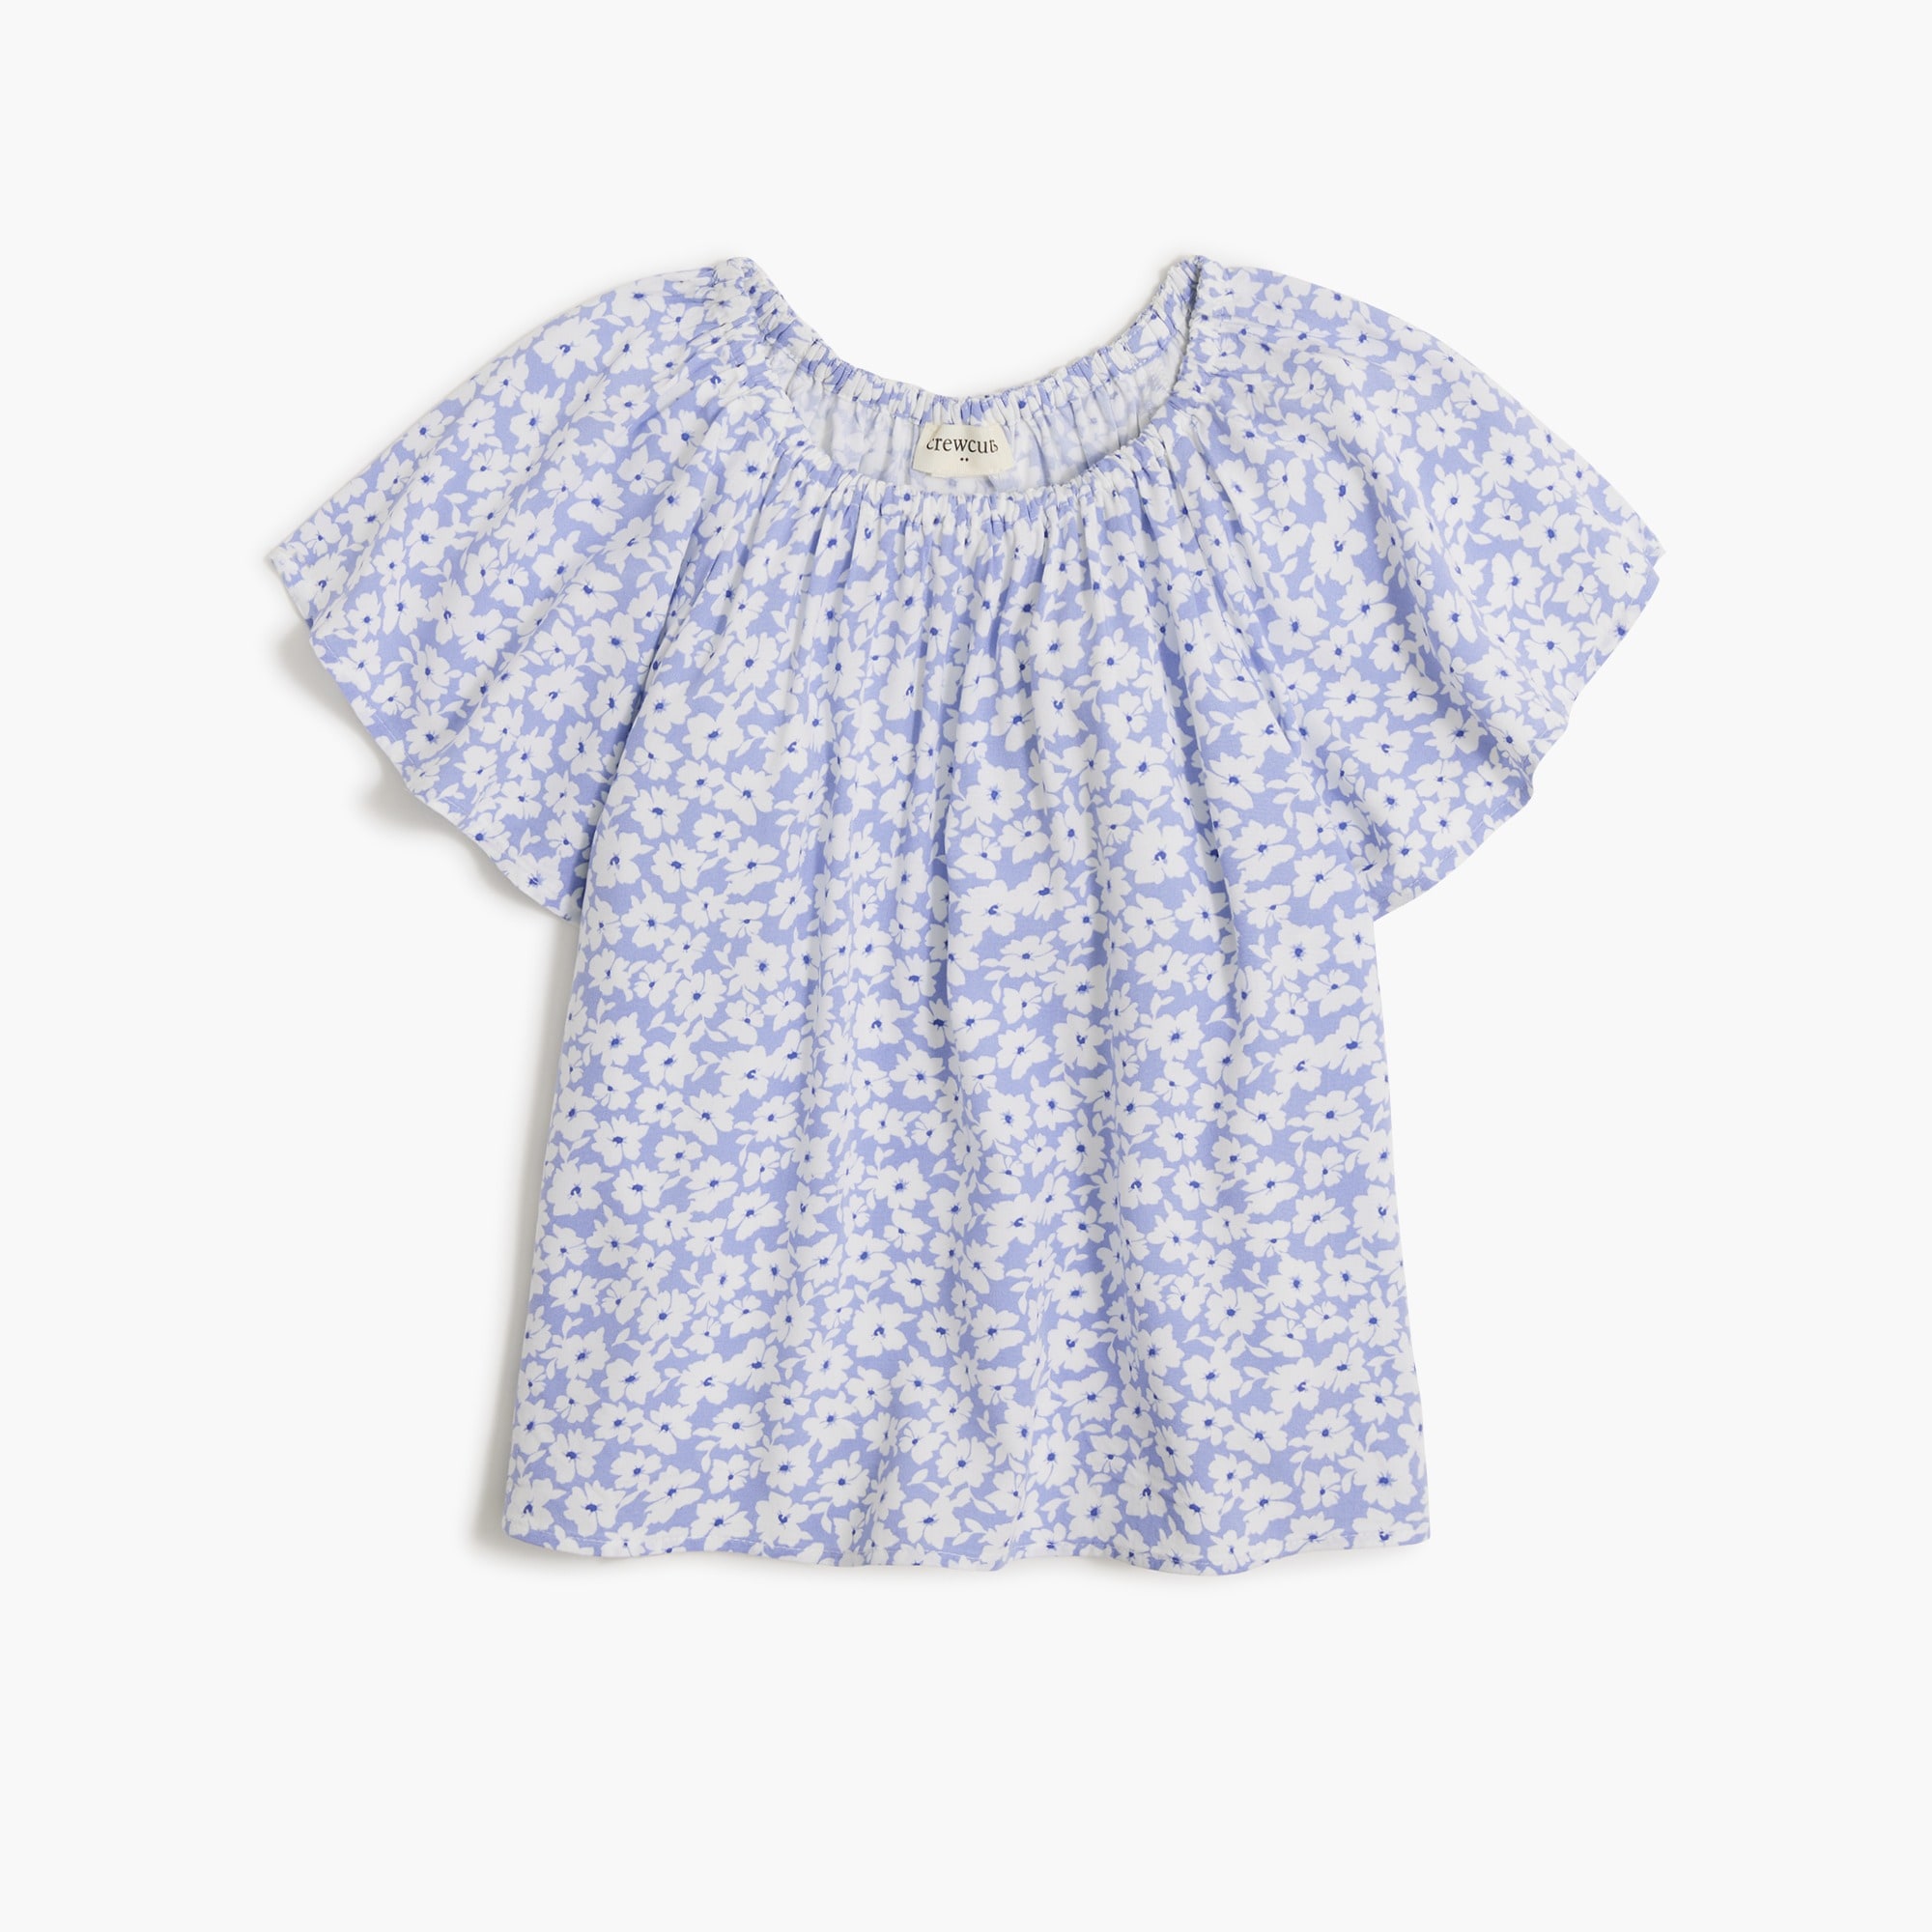  Girls' easy floral top